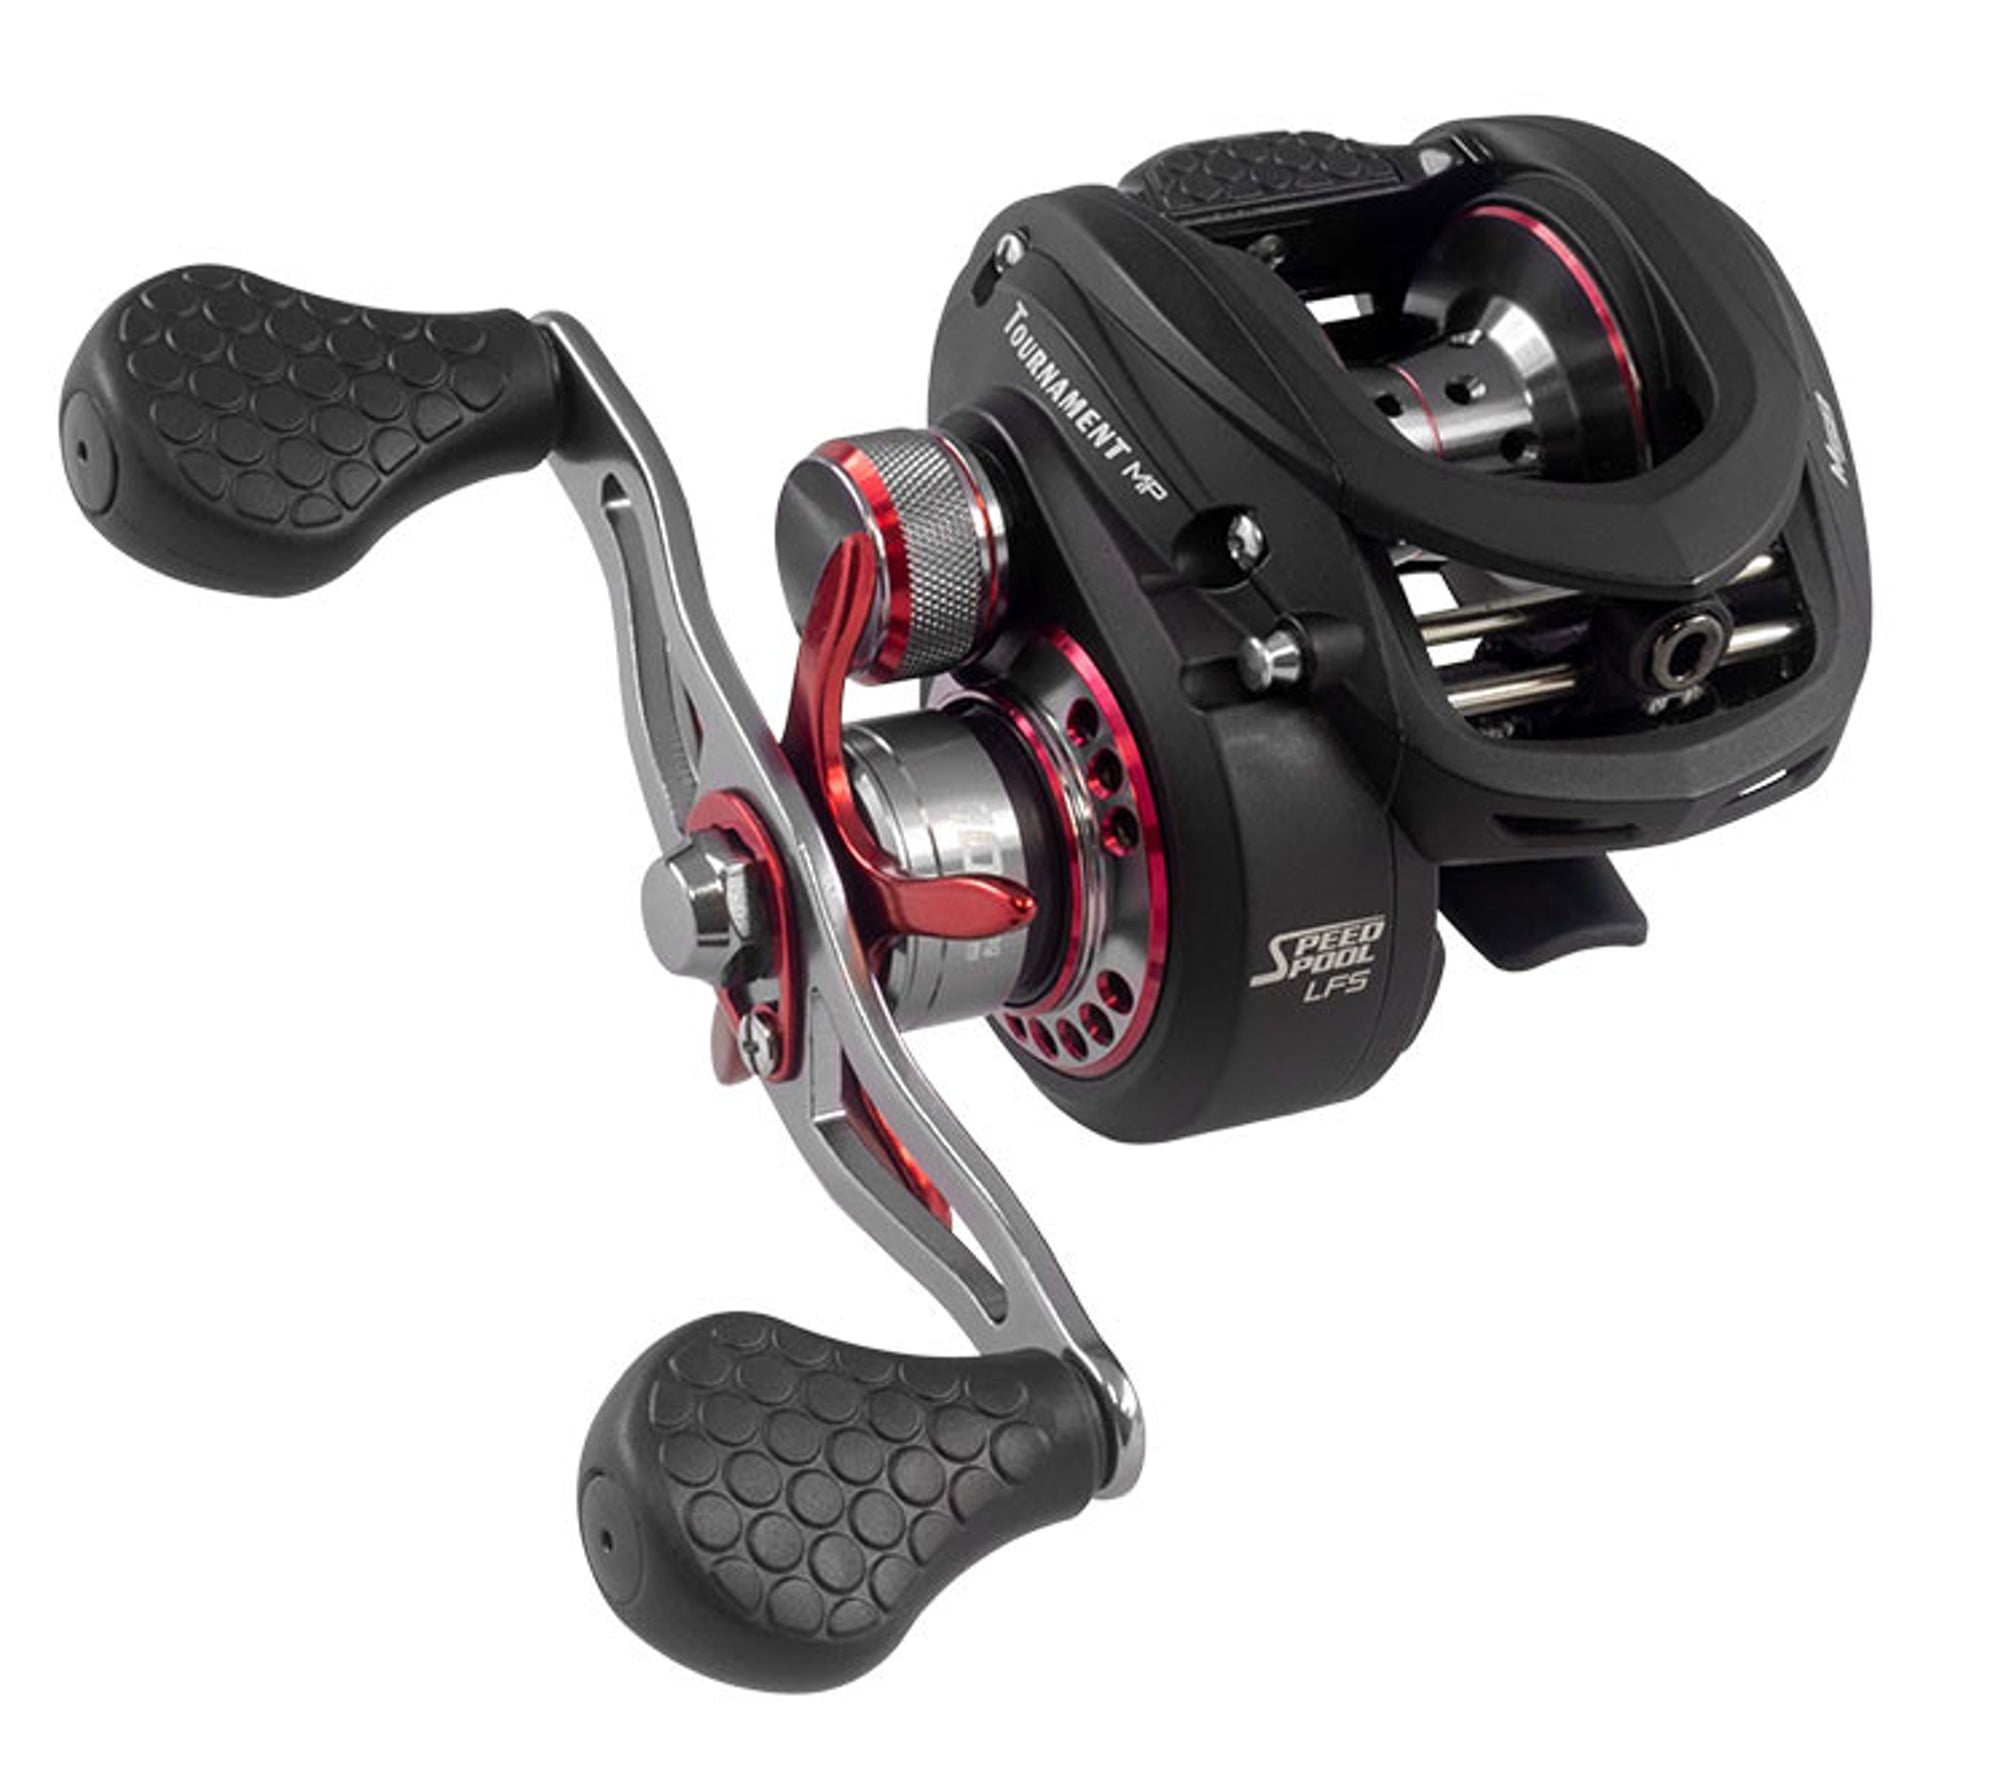 Lew's Tournament MP Speed Spool Baitcast Fishing Reel, Right-Hand Retrieve,  8.3:1 Gear Ratio, One-Piece Aluminum Body with Graphite Side plate,  Black/Red 